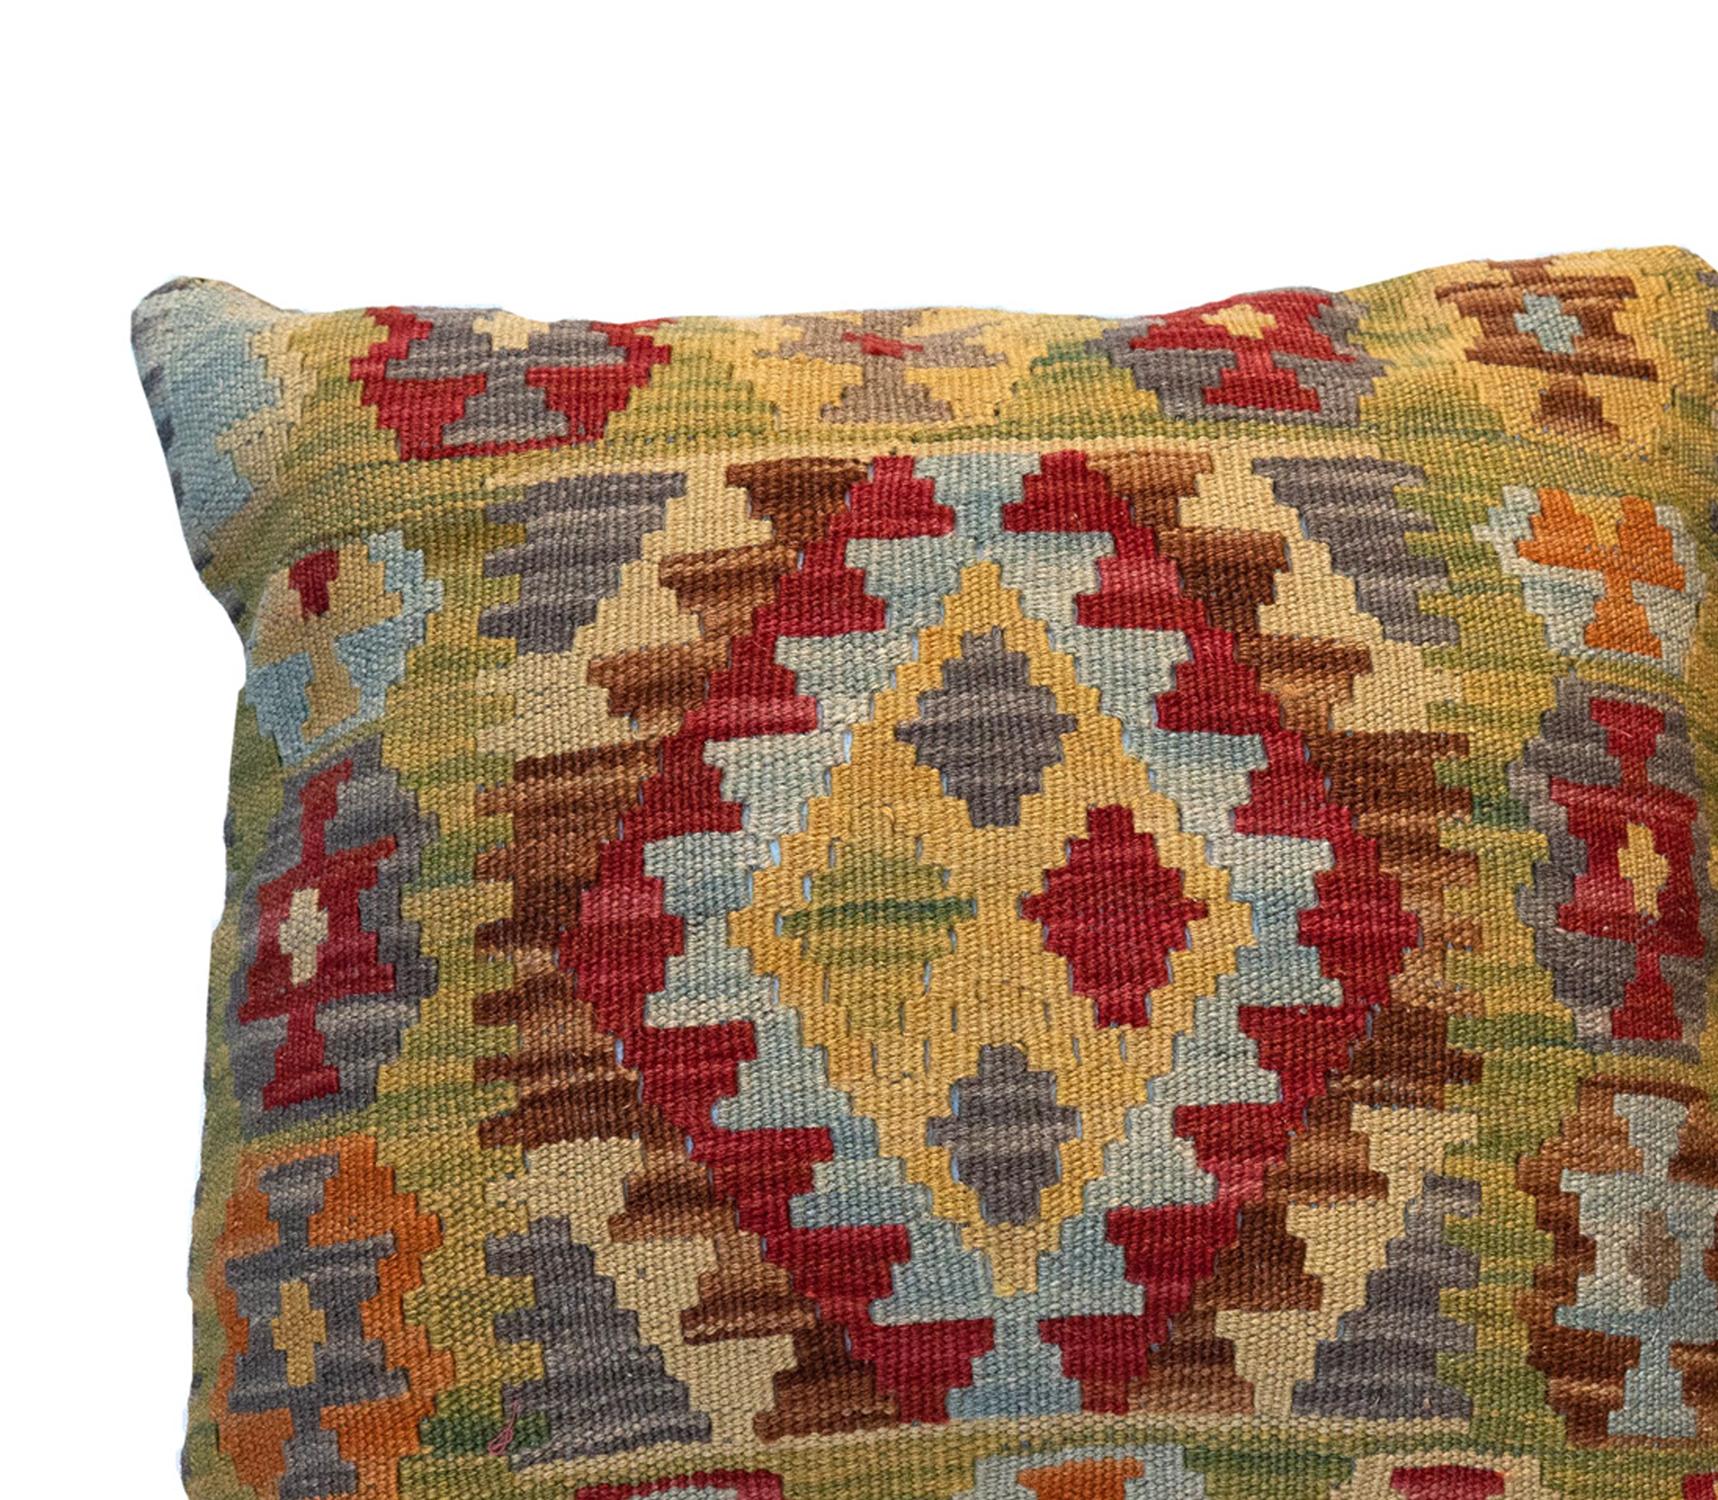 This truly unique geometric cushion cover is a handwoven kilim cushion cover woven in Afghanistan in the late 20th century/ early 21st century. Woven with an elegant geometric design with a bold colour palette of green, red and beige. The colours